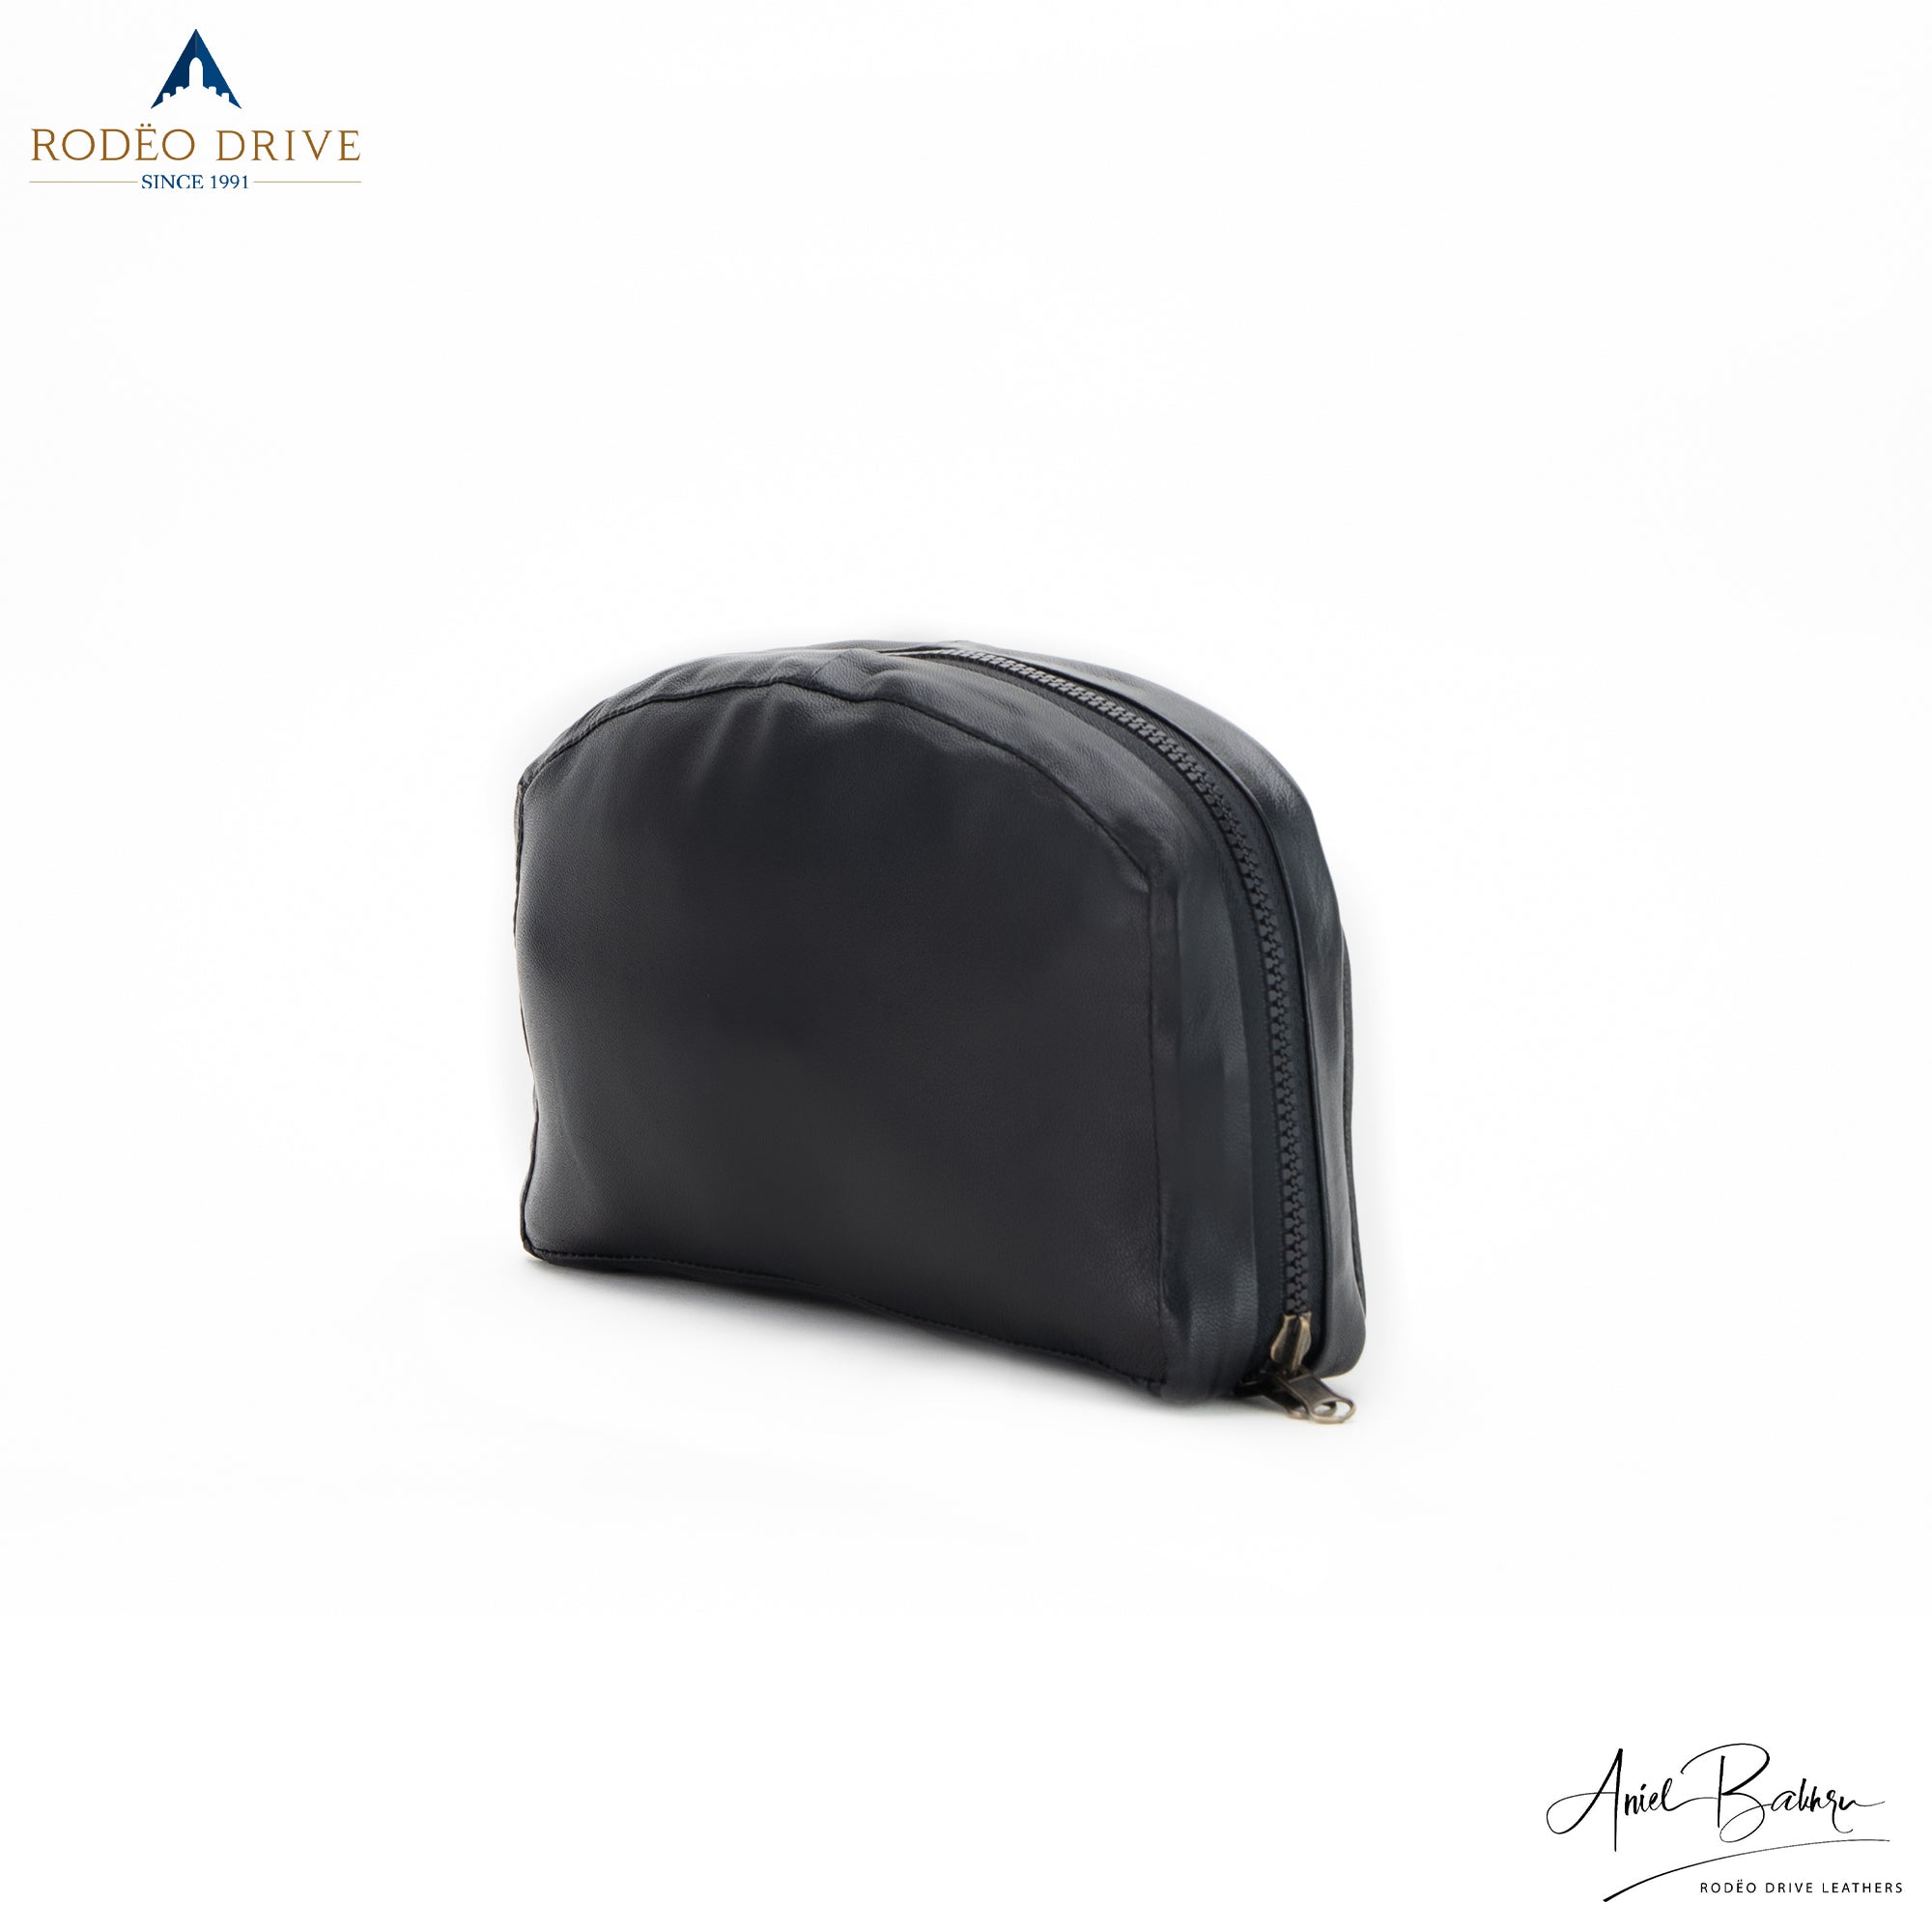 Side view of black COLLAPSIBLE LEATHER BACKPACK